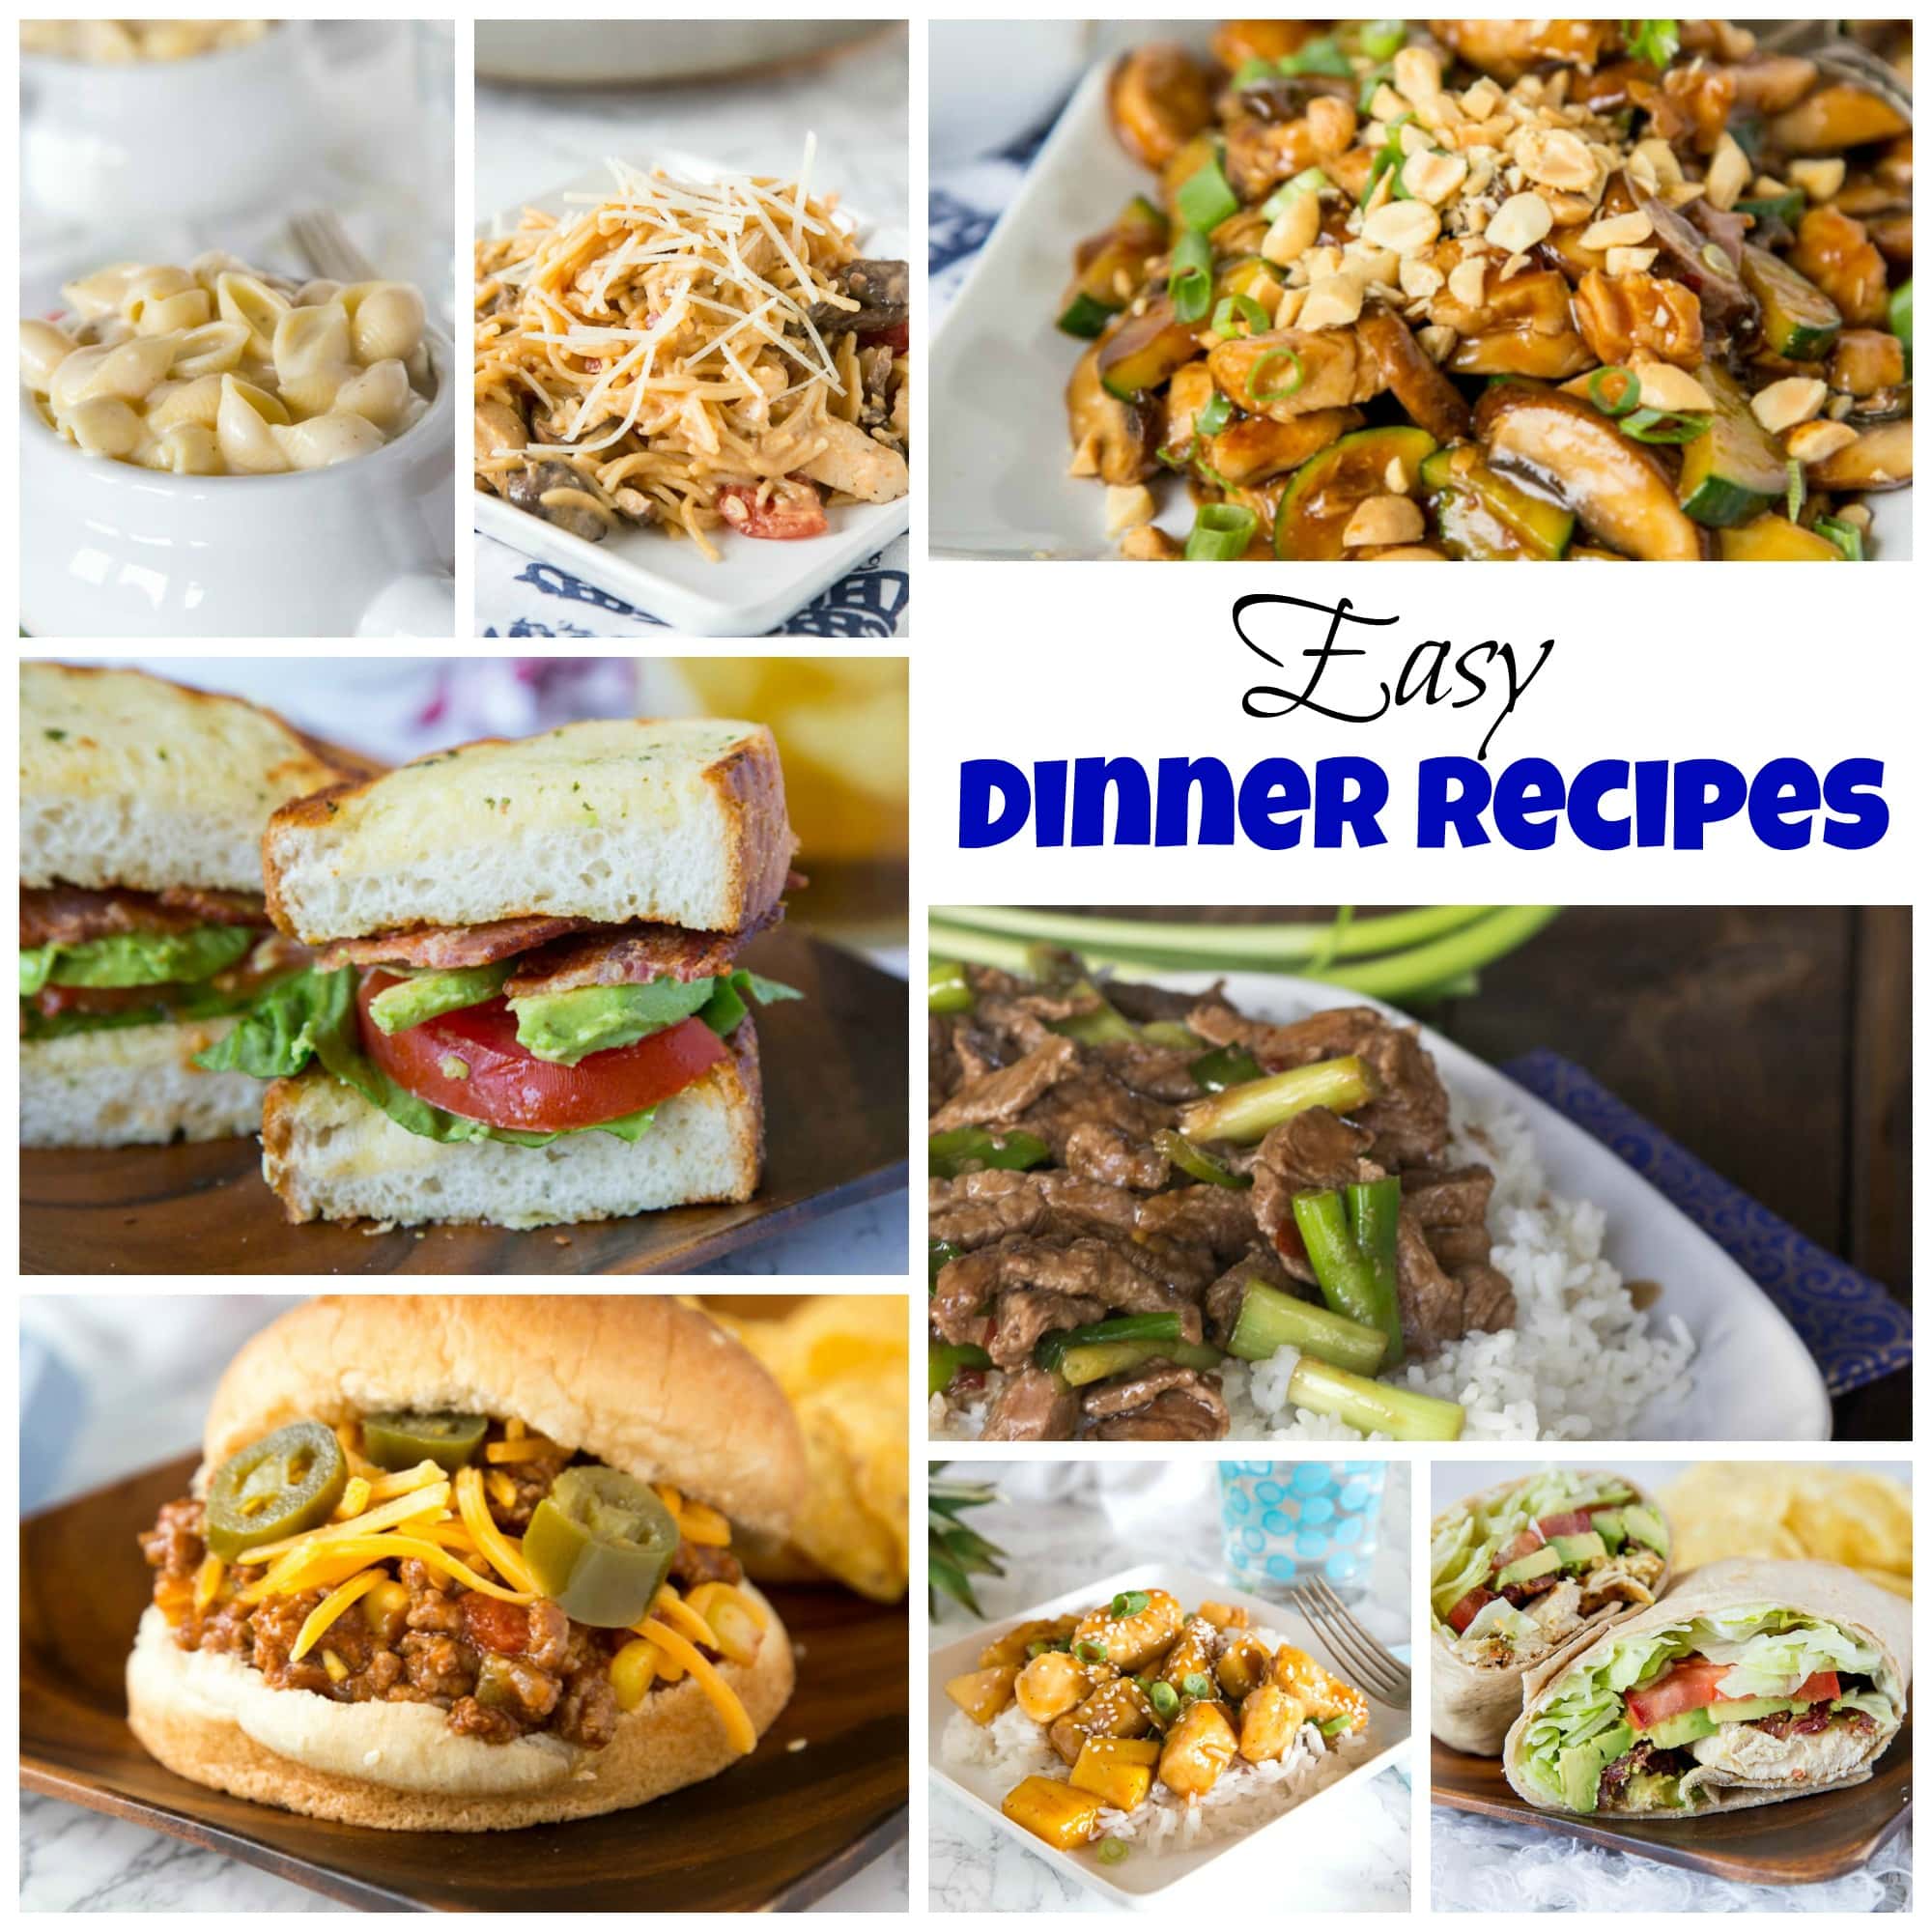 Easy Dinner Recipes - dinner doesn't have to be complicated. You can get dinner on the table in just minutes with all of these easy dinner recipes!